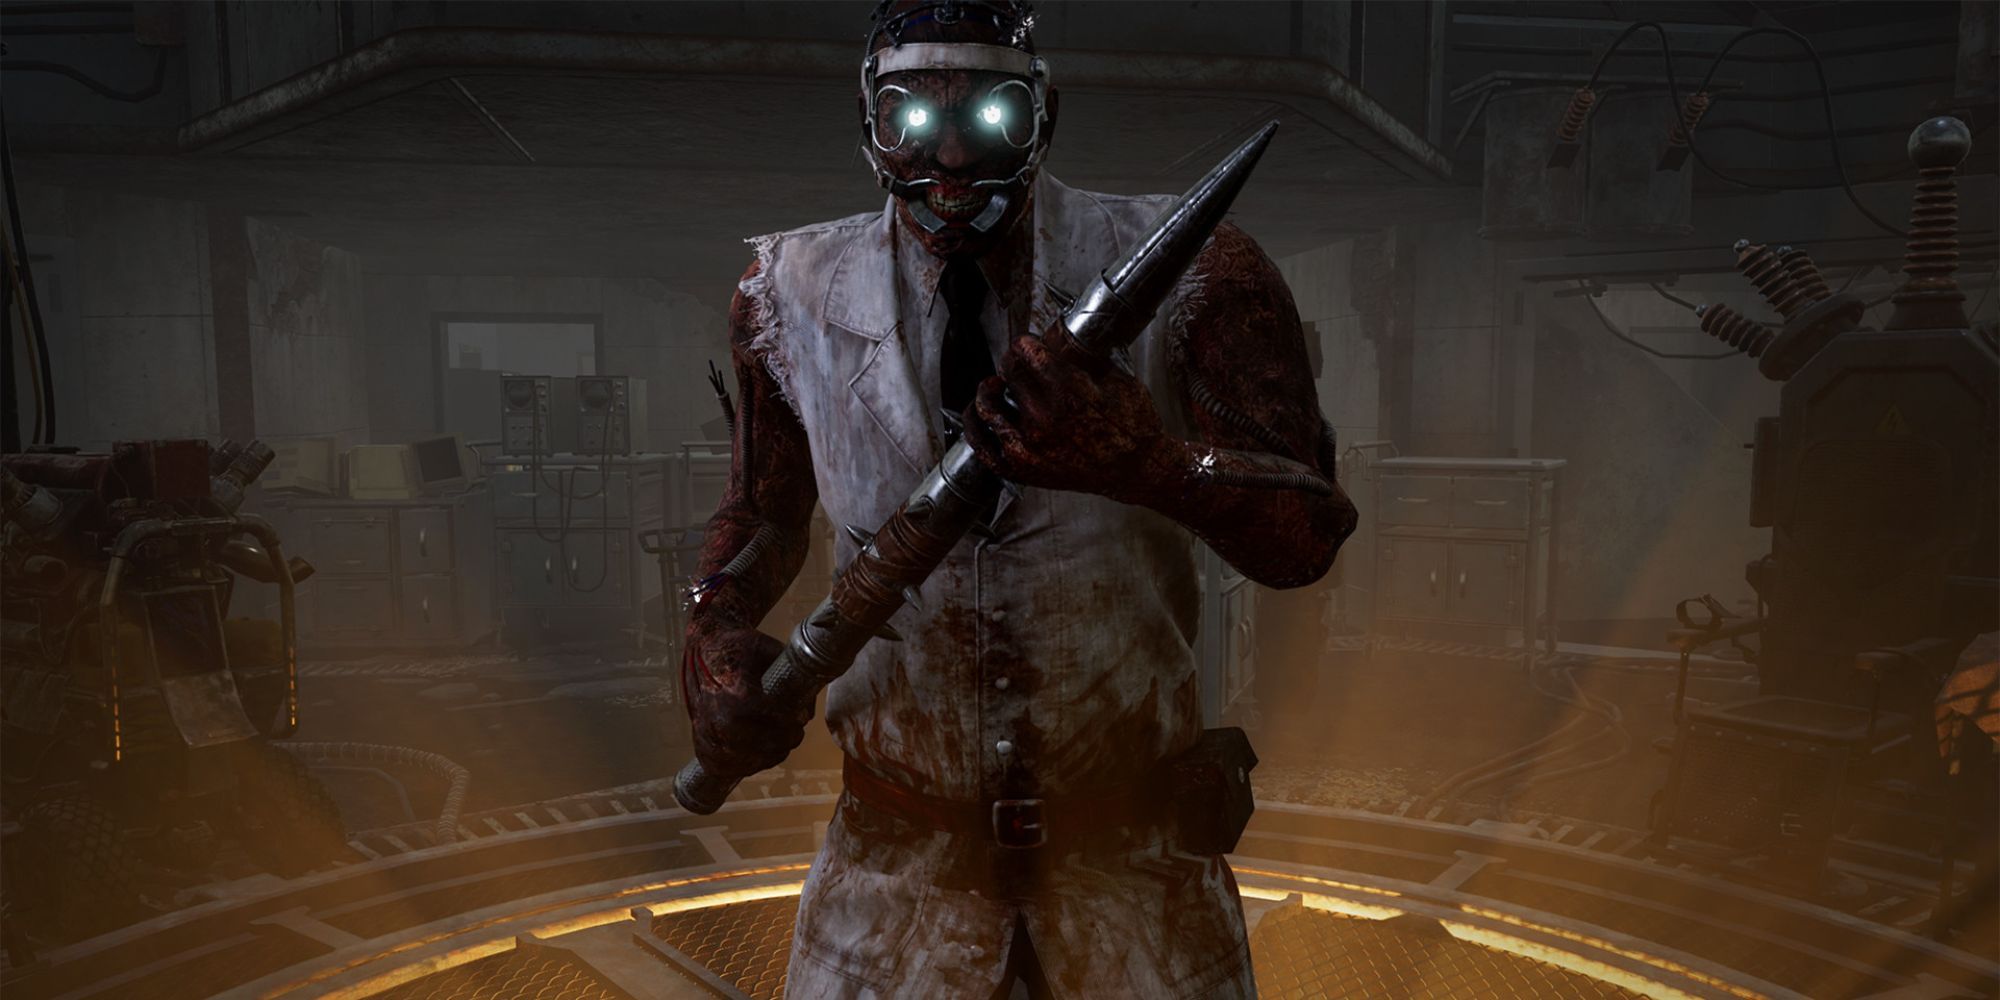 The killer called the Doctor from Dead By Daylight